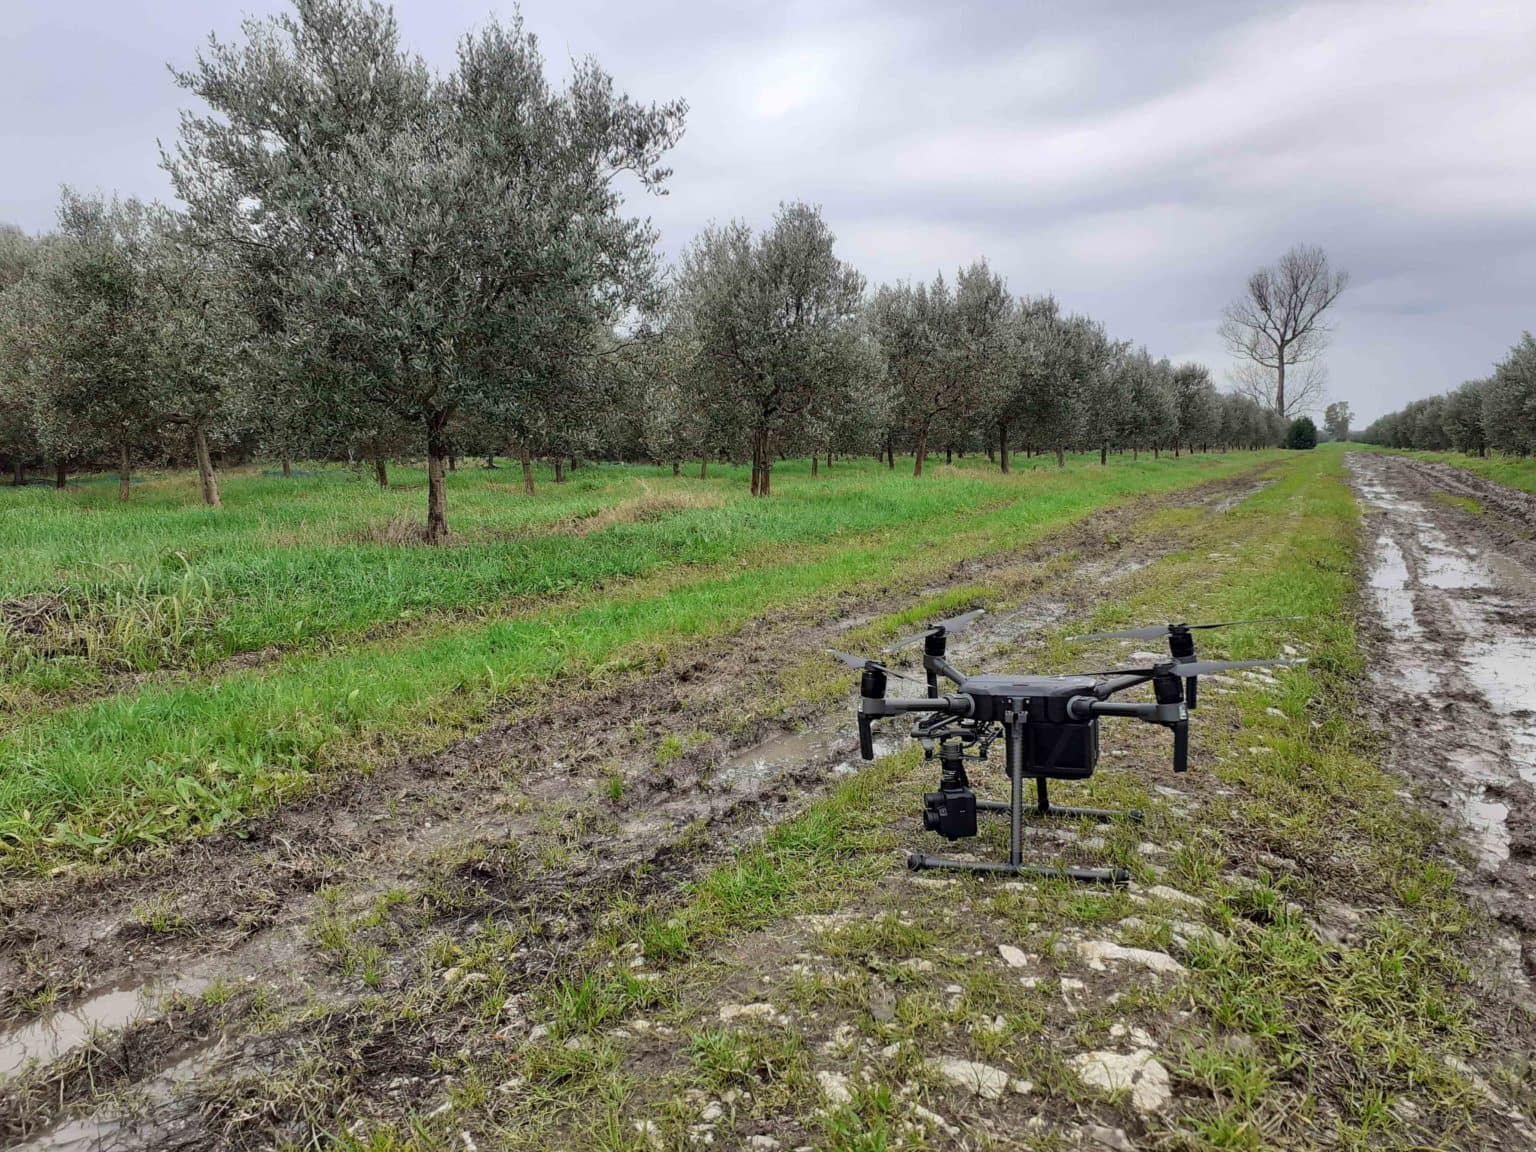 world-production-improving-olive-grove-biodiversity-helps-fight-xylella-fastidiosa-and-climate-change-olive-oil-times